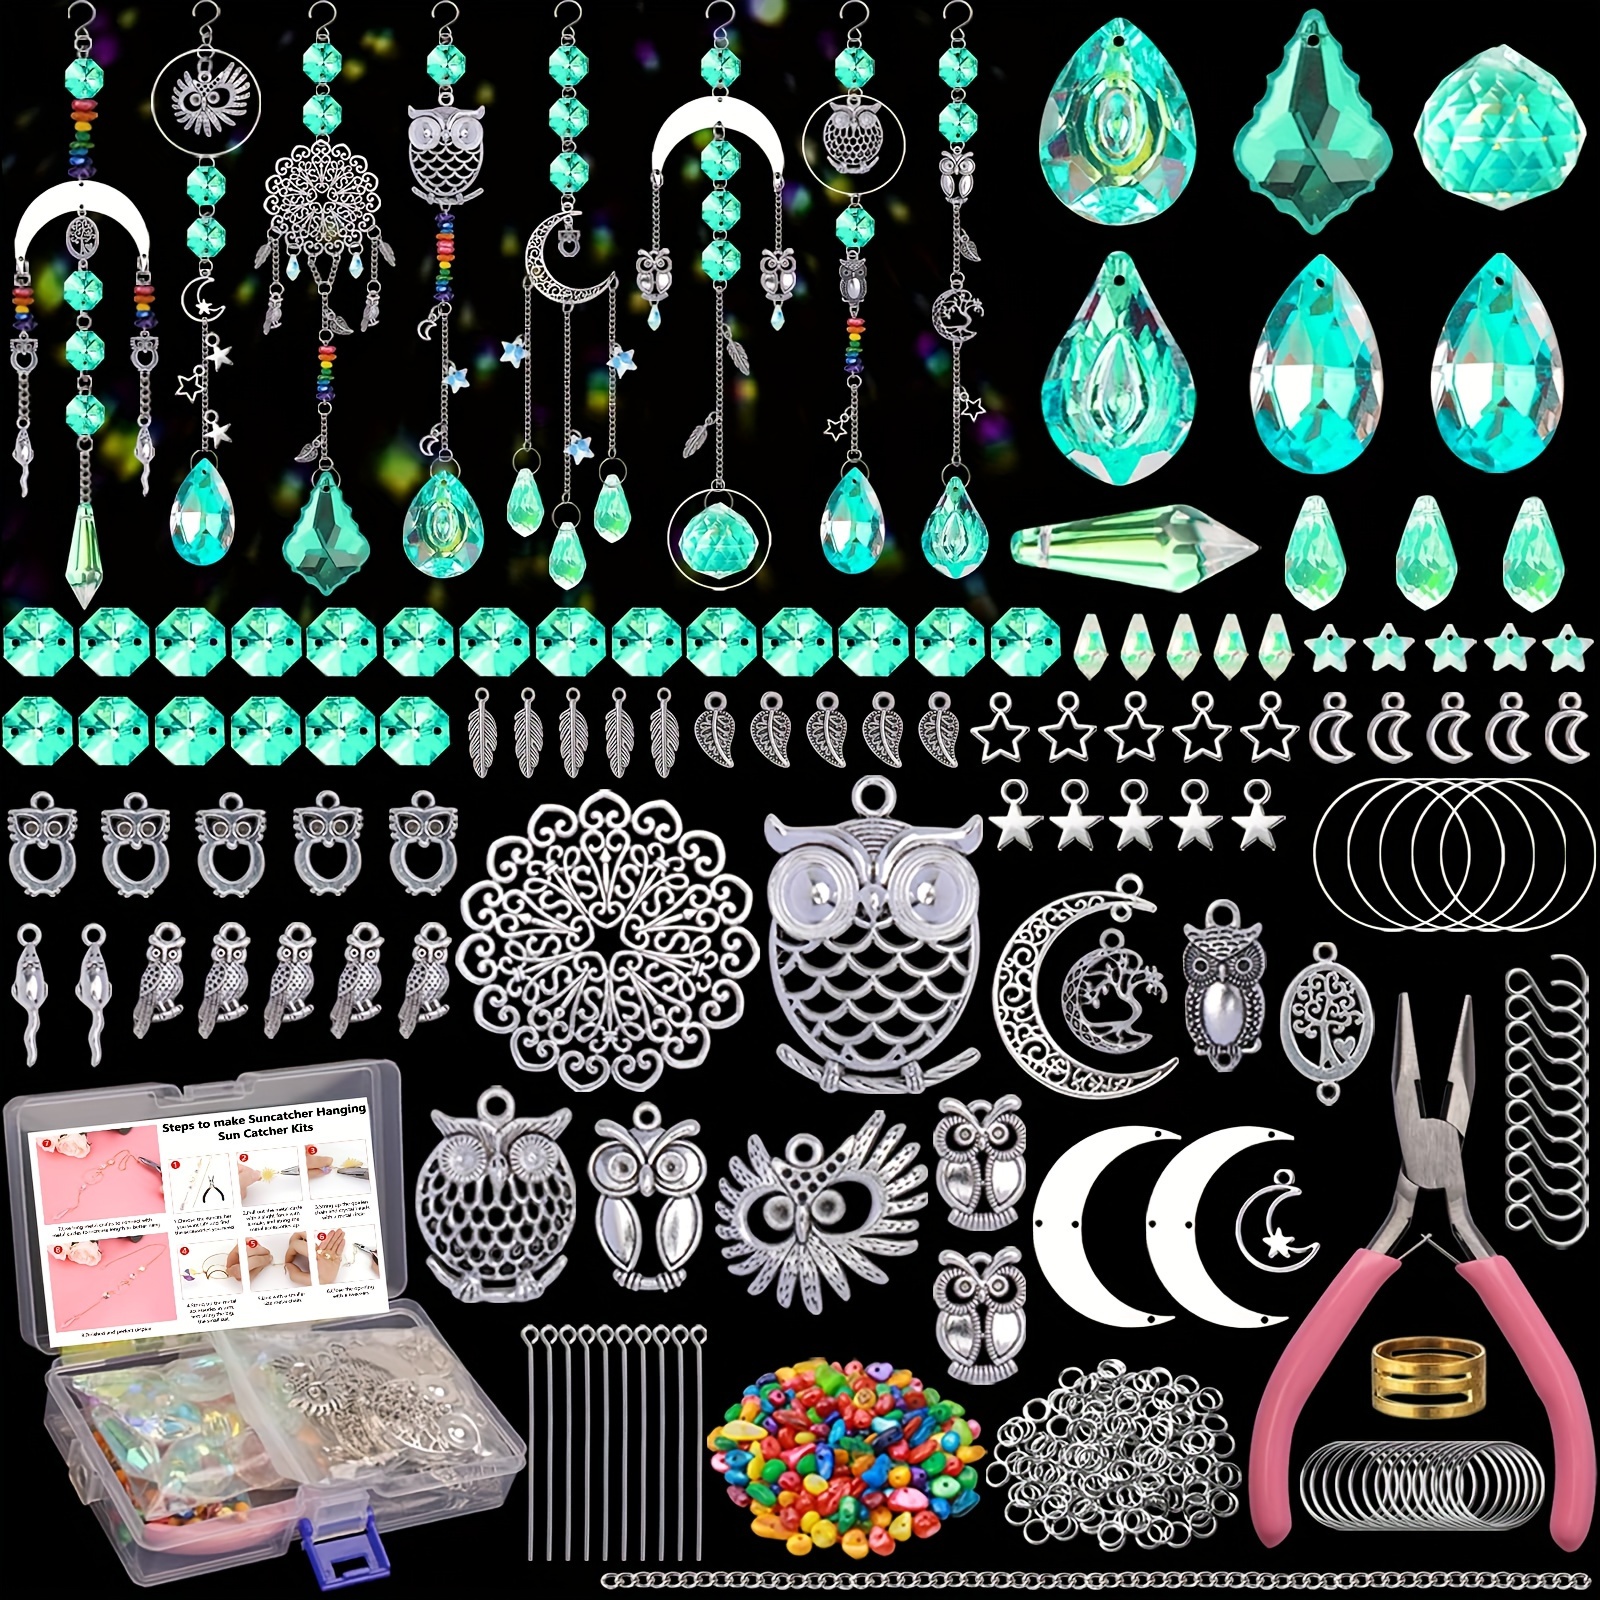 

420-piece Suncatcher Diy Kit For Adults – Wedding Crystal Rainbow Makers With Glass Beads & Tools – Owl Design Sun Catcher Crafts For Indoor Windows – Glass Suncatchers Making Supplies Set